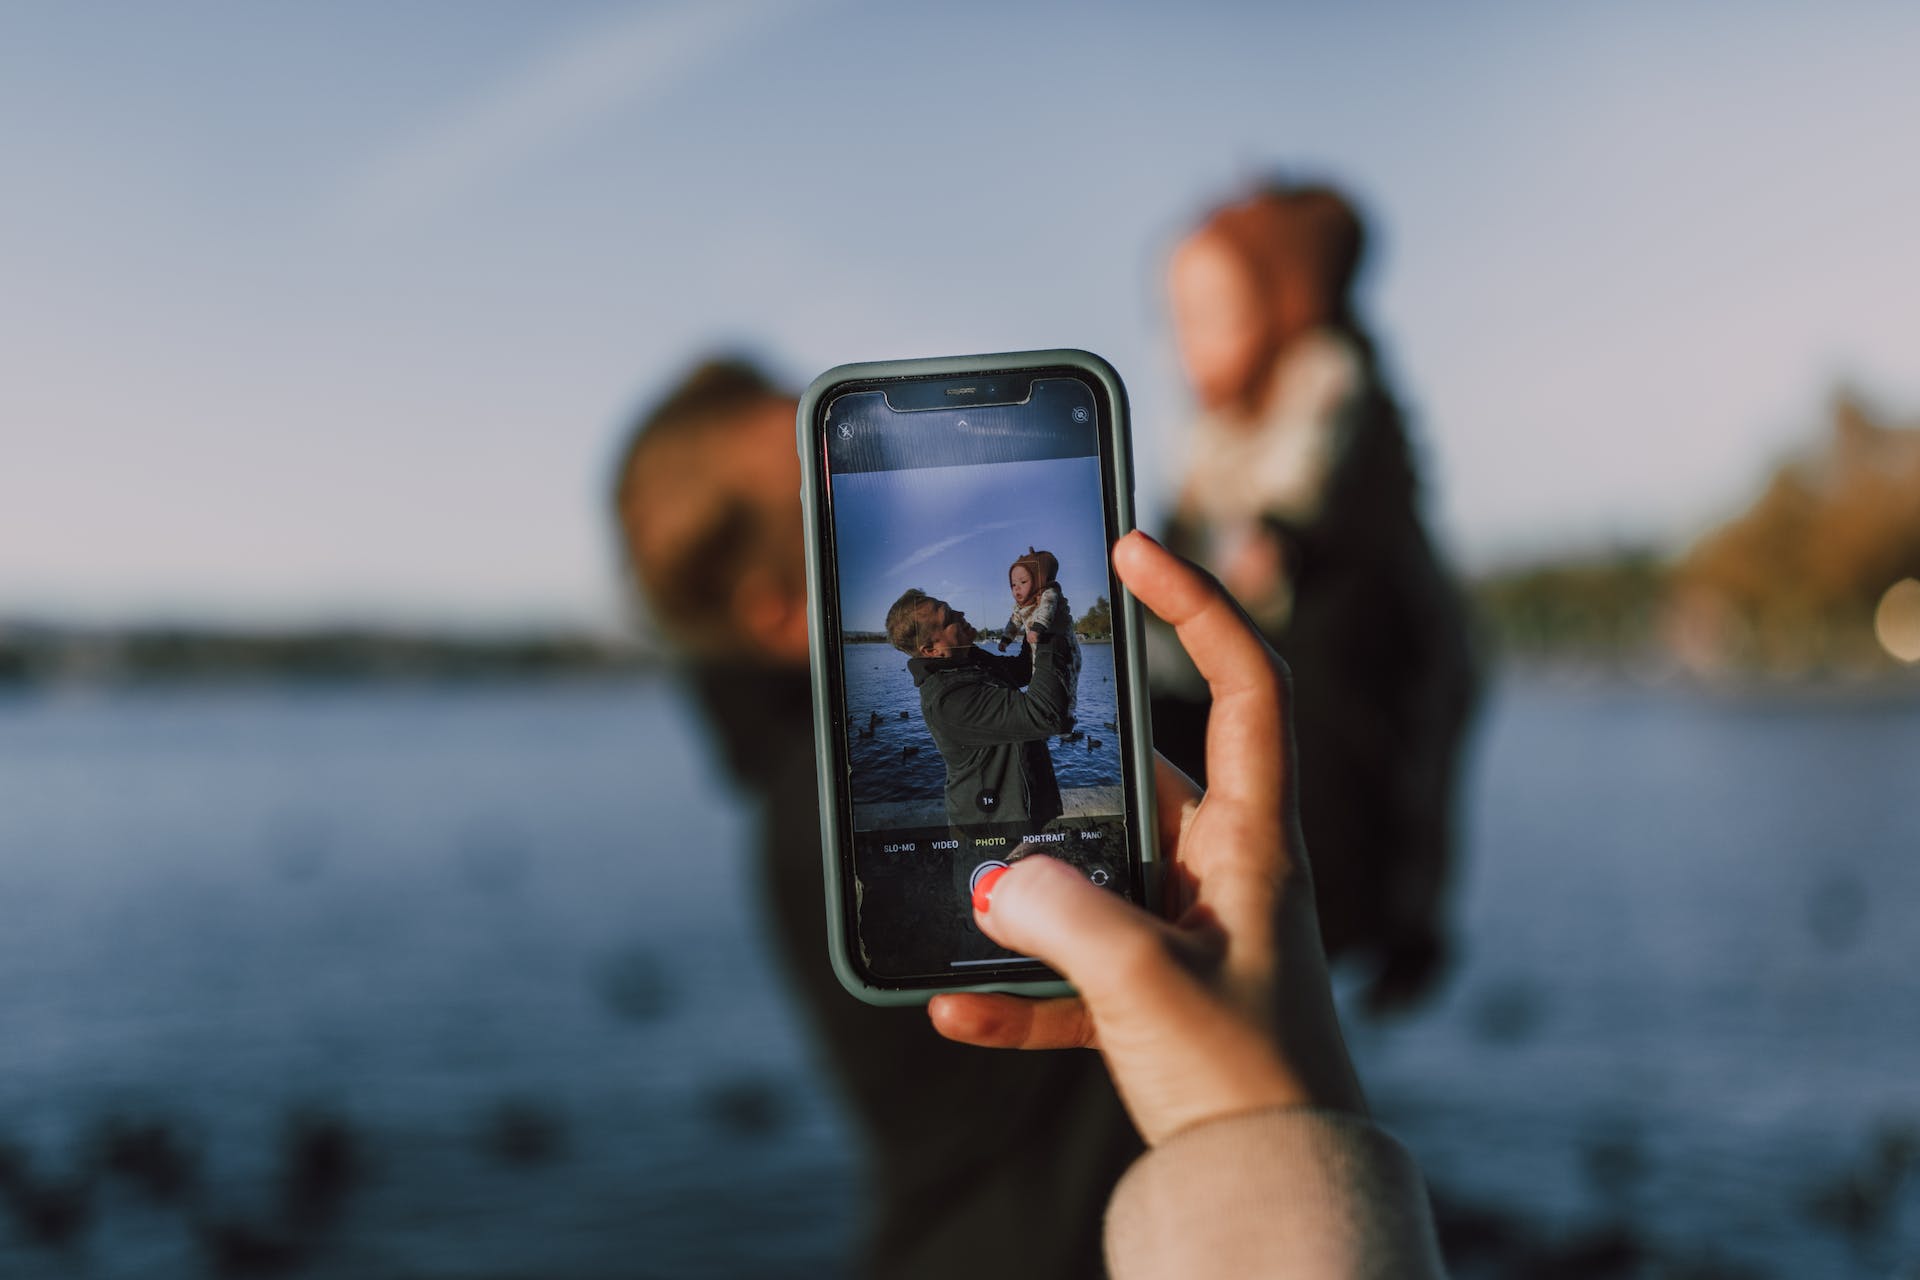 A woman taking a picture of a man holding a baby | Source: Pexels